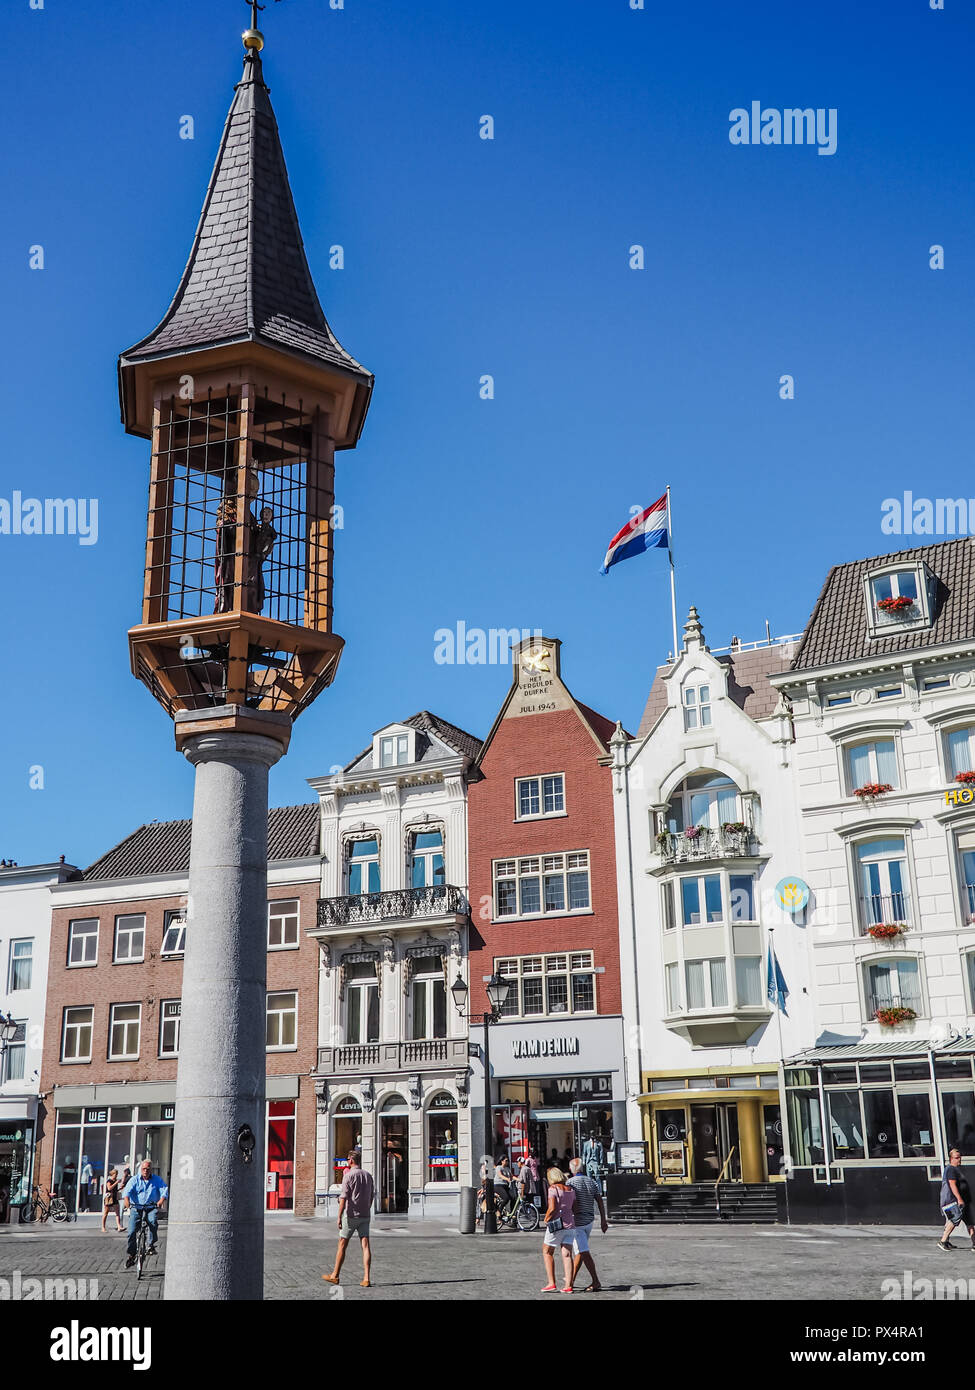 's-Hertogenbosch, Netherlands - August 2018: Small tower with statue of Saint Mary holding Jesus on the market square in the city center Stock Photo